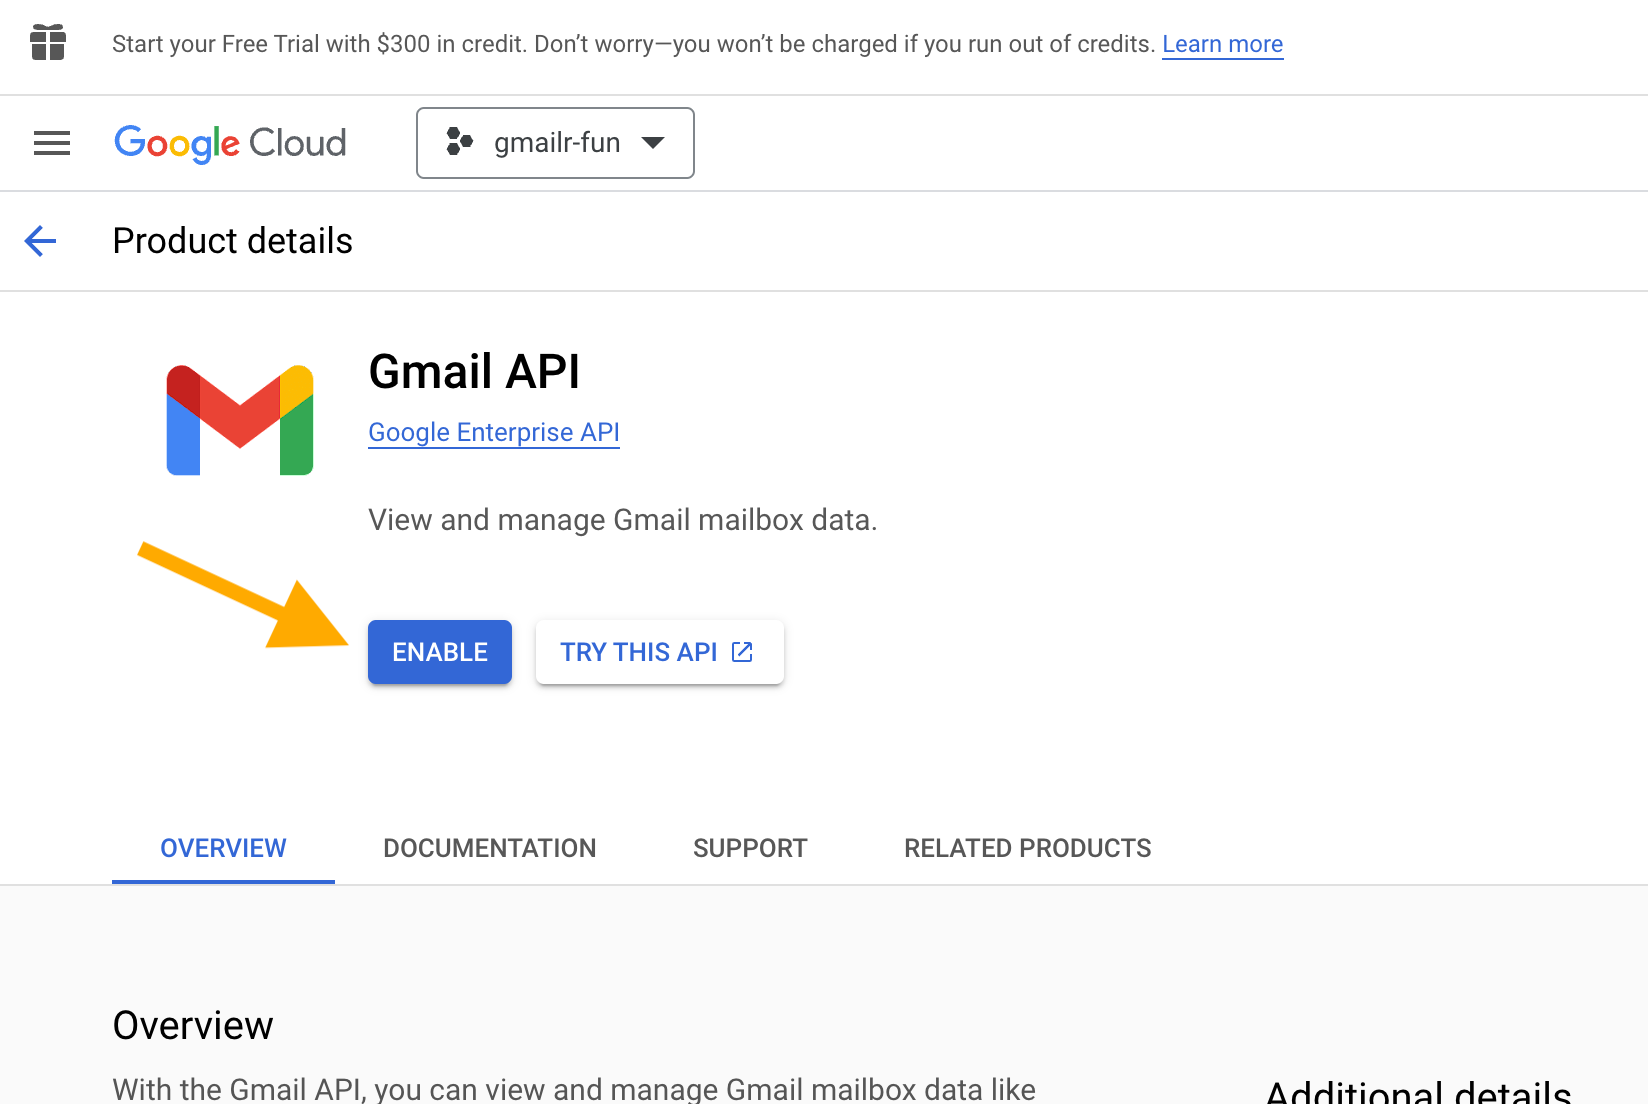 Screen for the Gmail API with an arrow pointing at the "ENABLE" button.